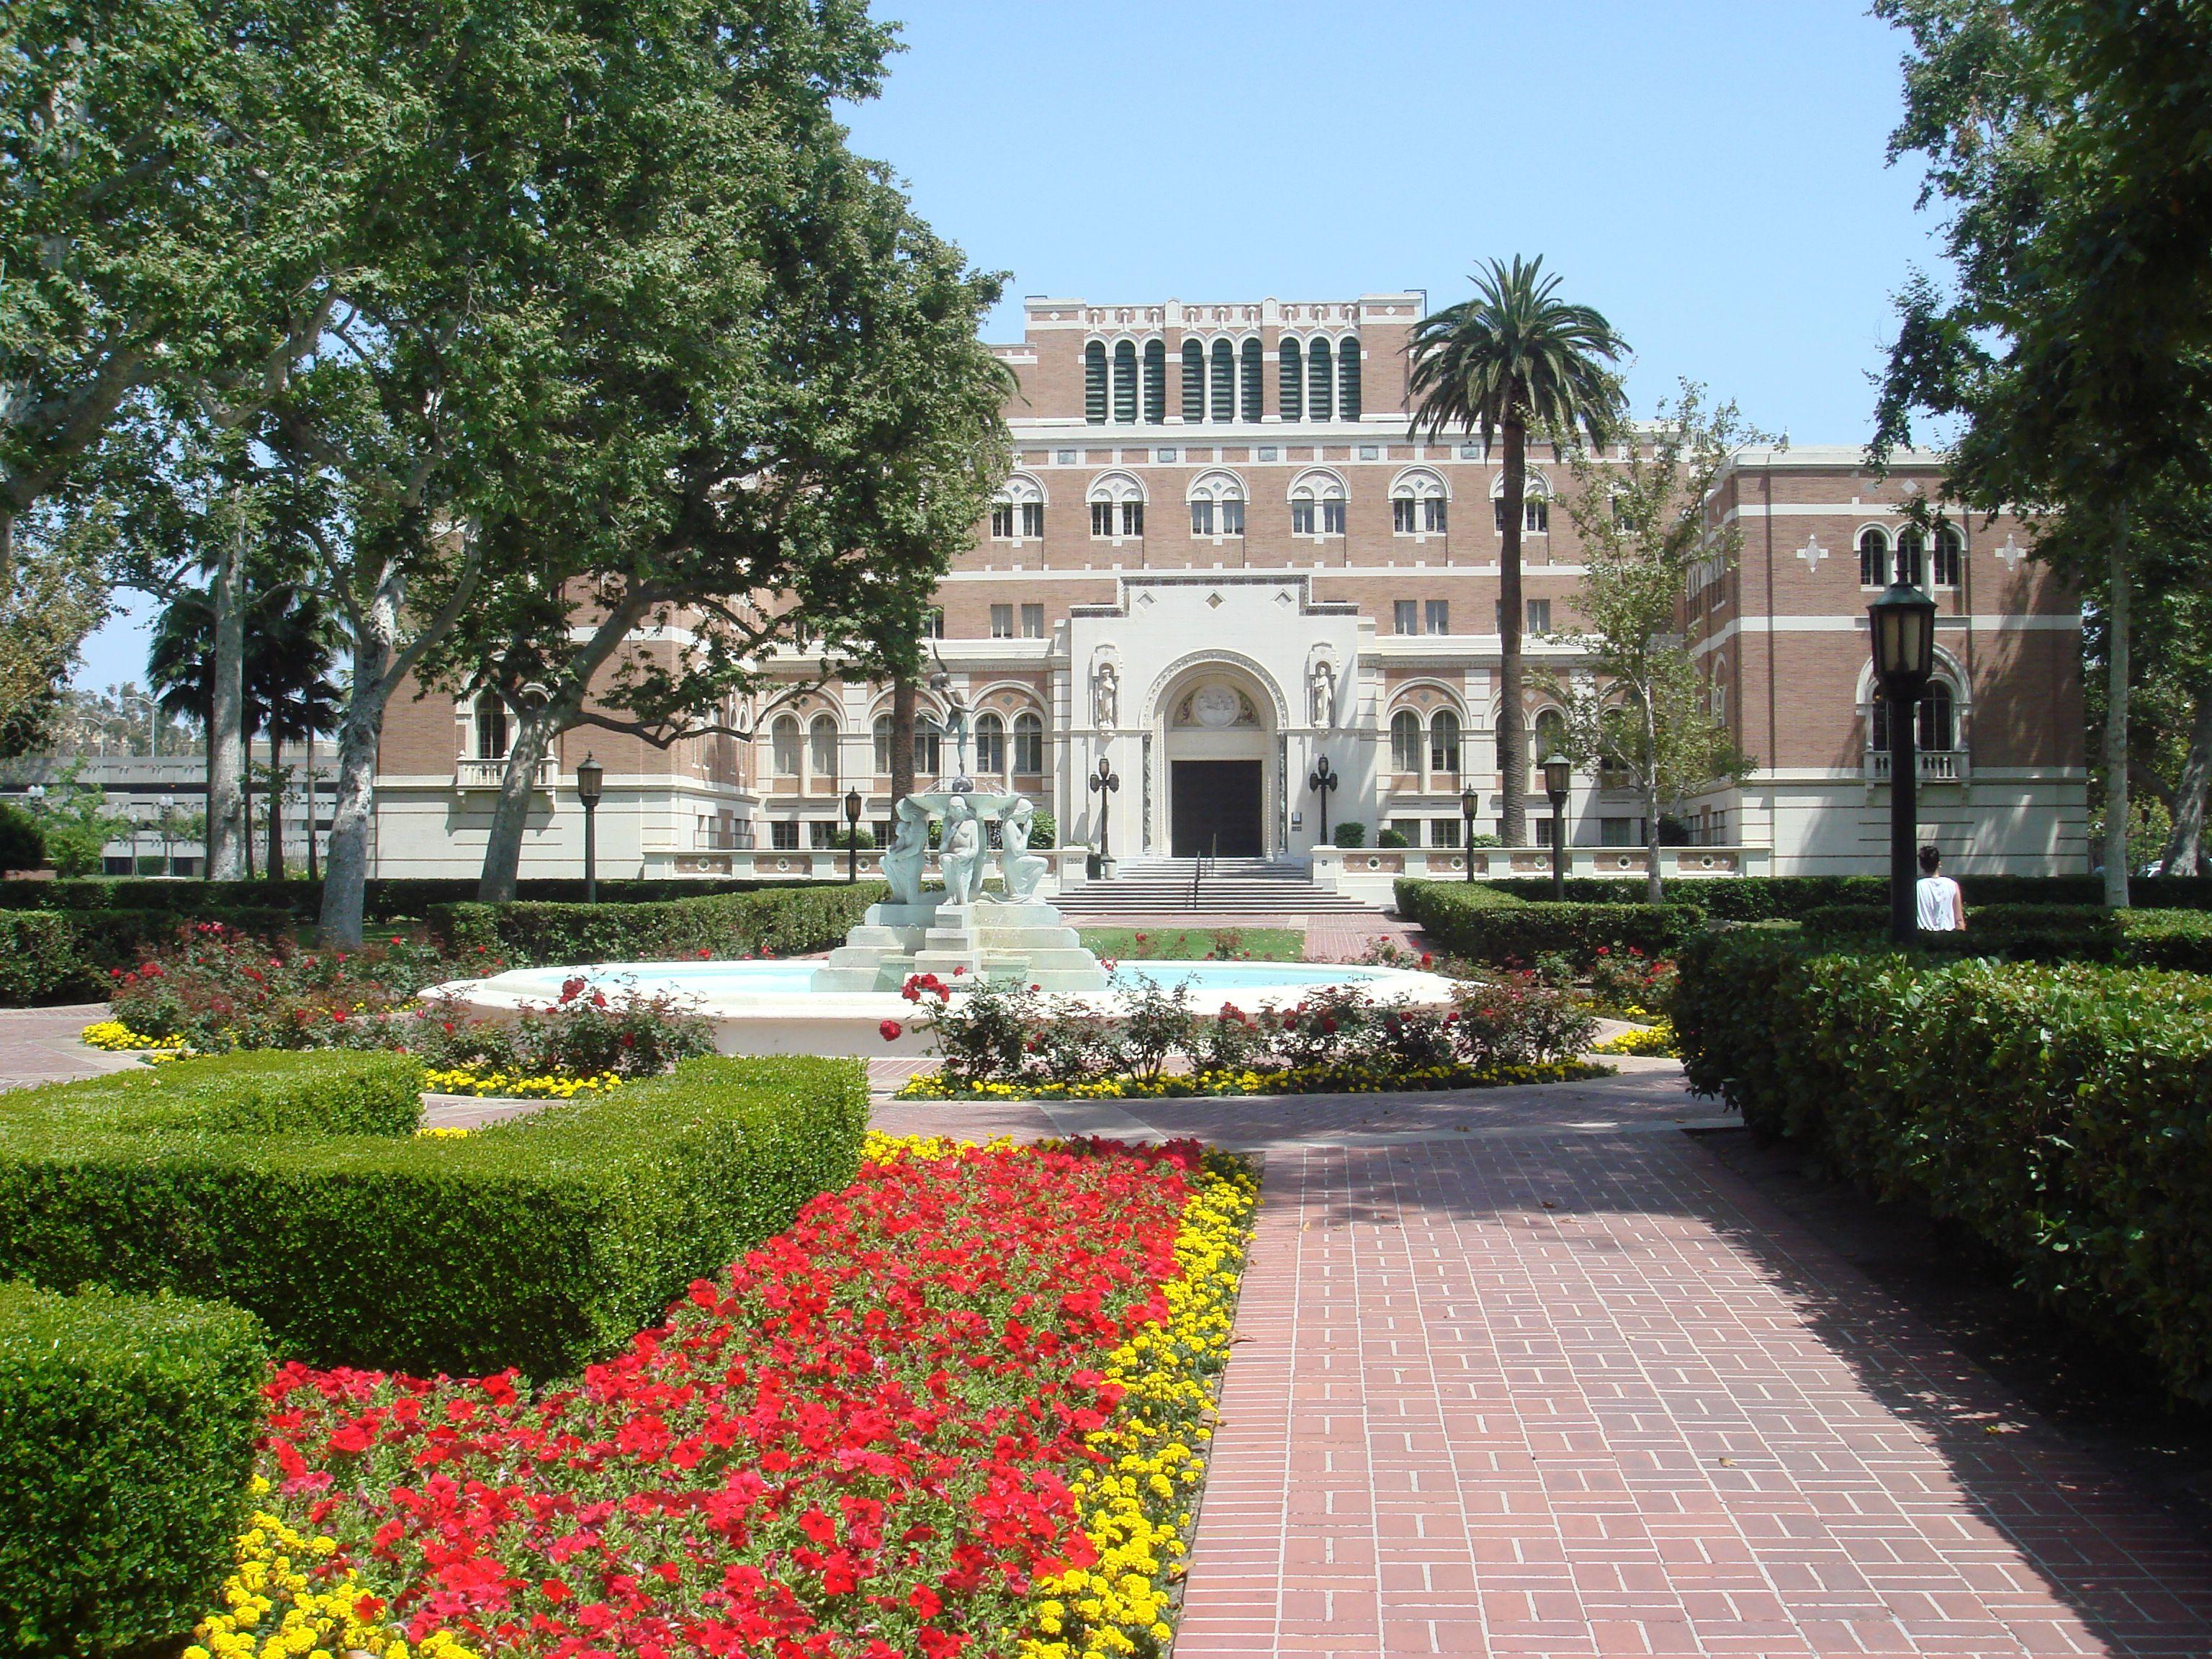 University of Southern California Wallpapers Top Free University of